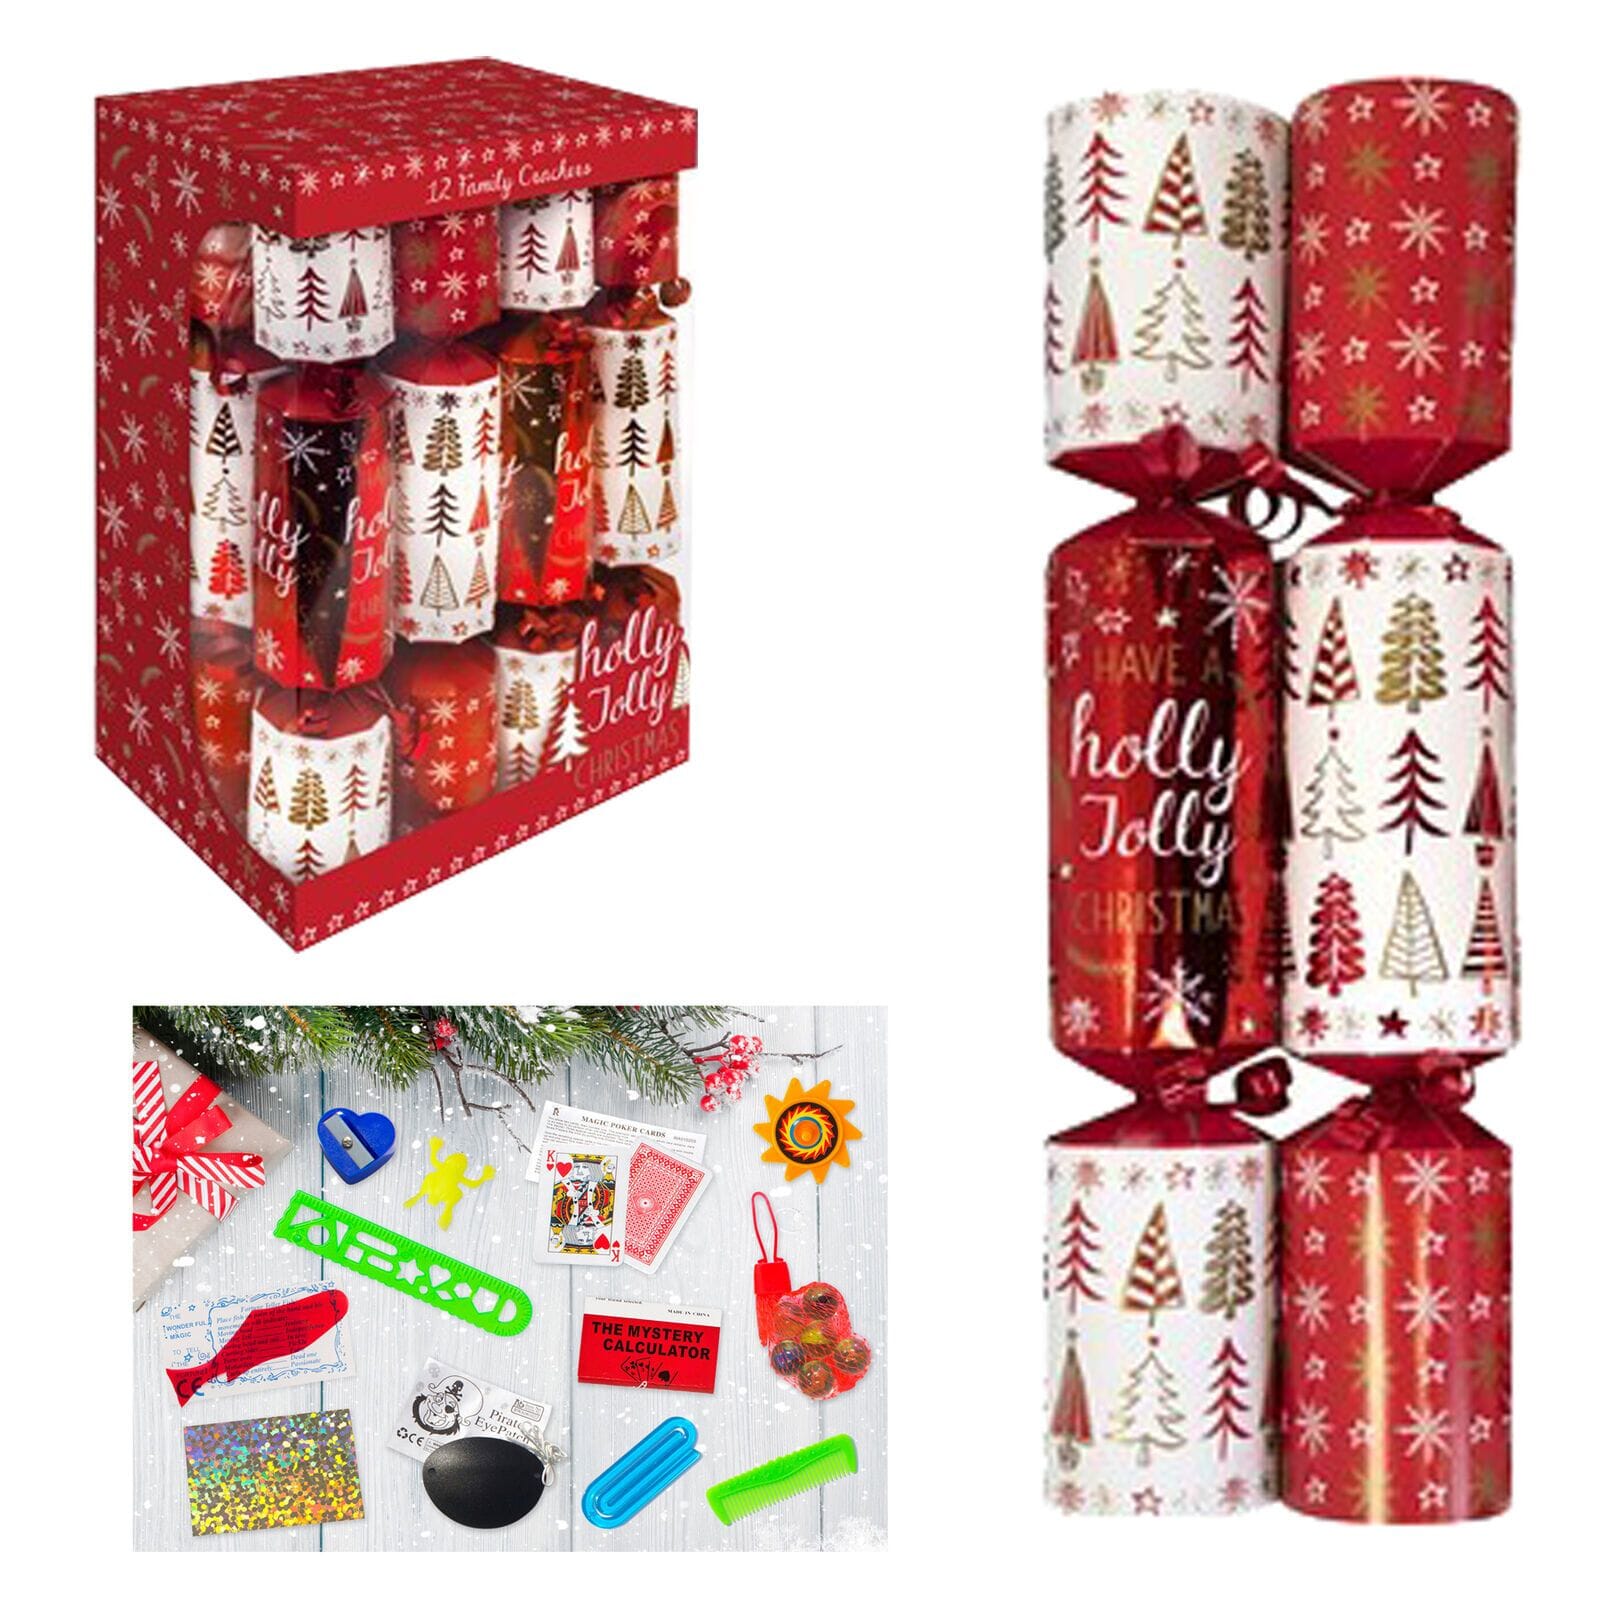 Crackers - Pack Of Twelve Family Crackers Red / White Holly Jolly 30cm